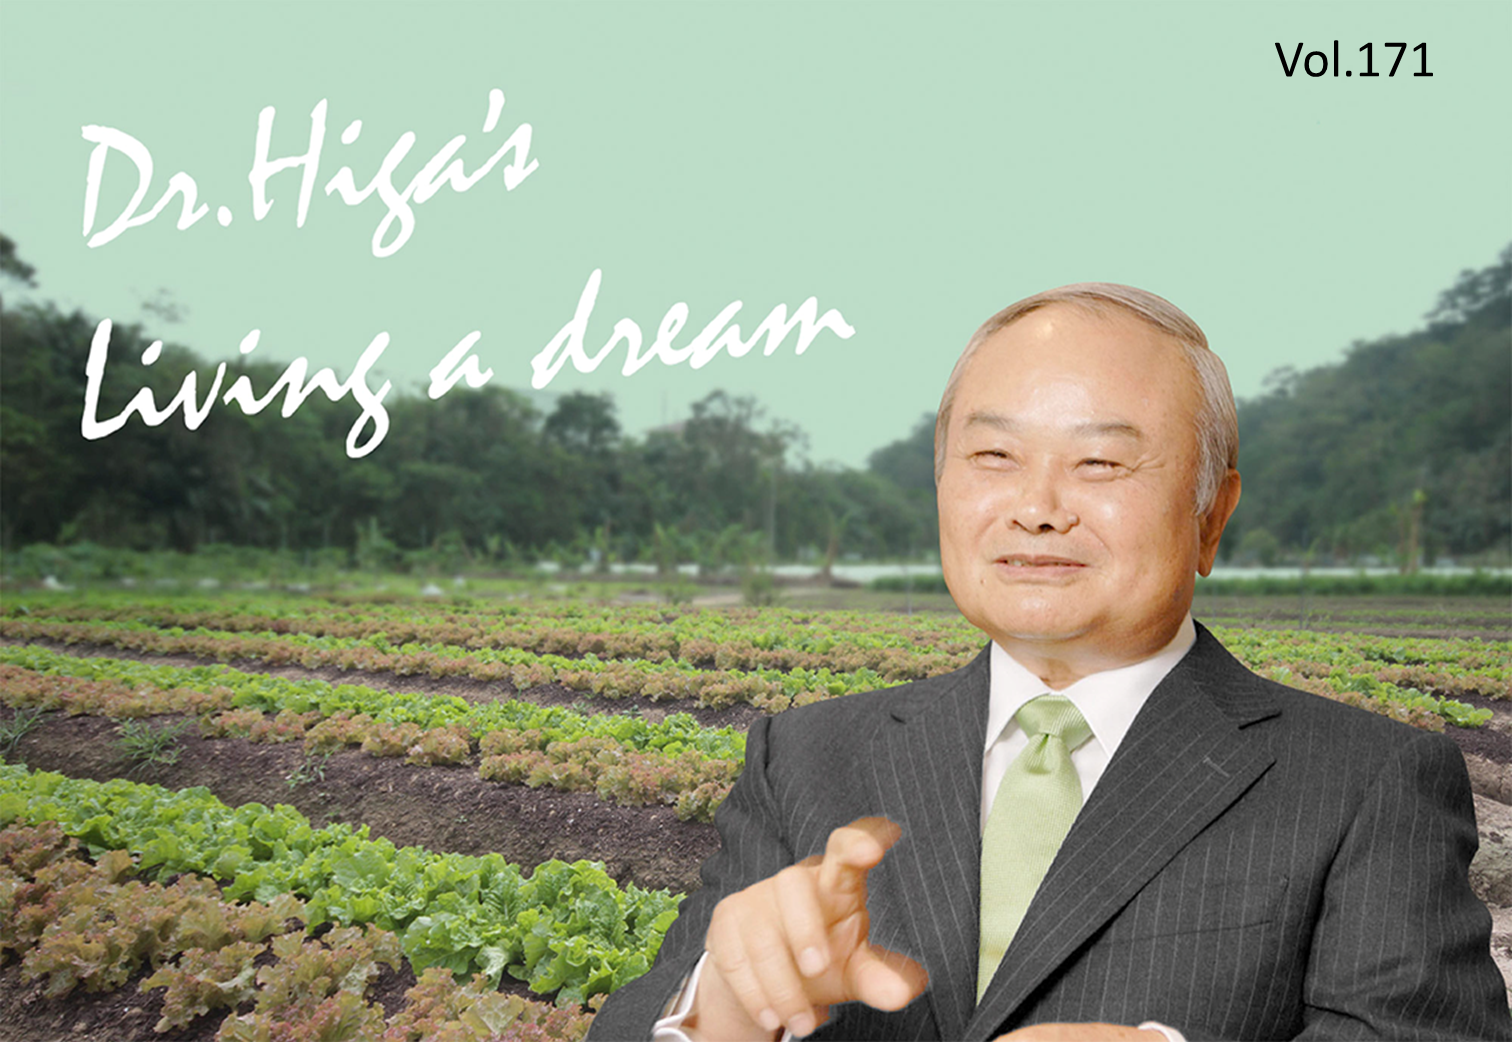 Dr. Higa's "Living a Dream": the latest article #171 is up!!!